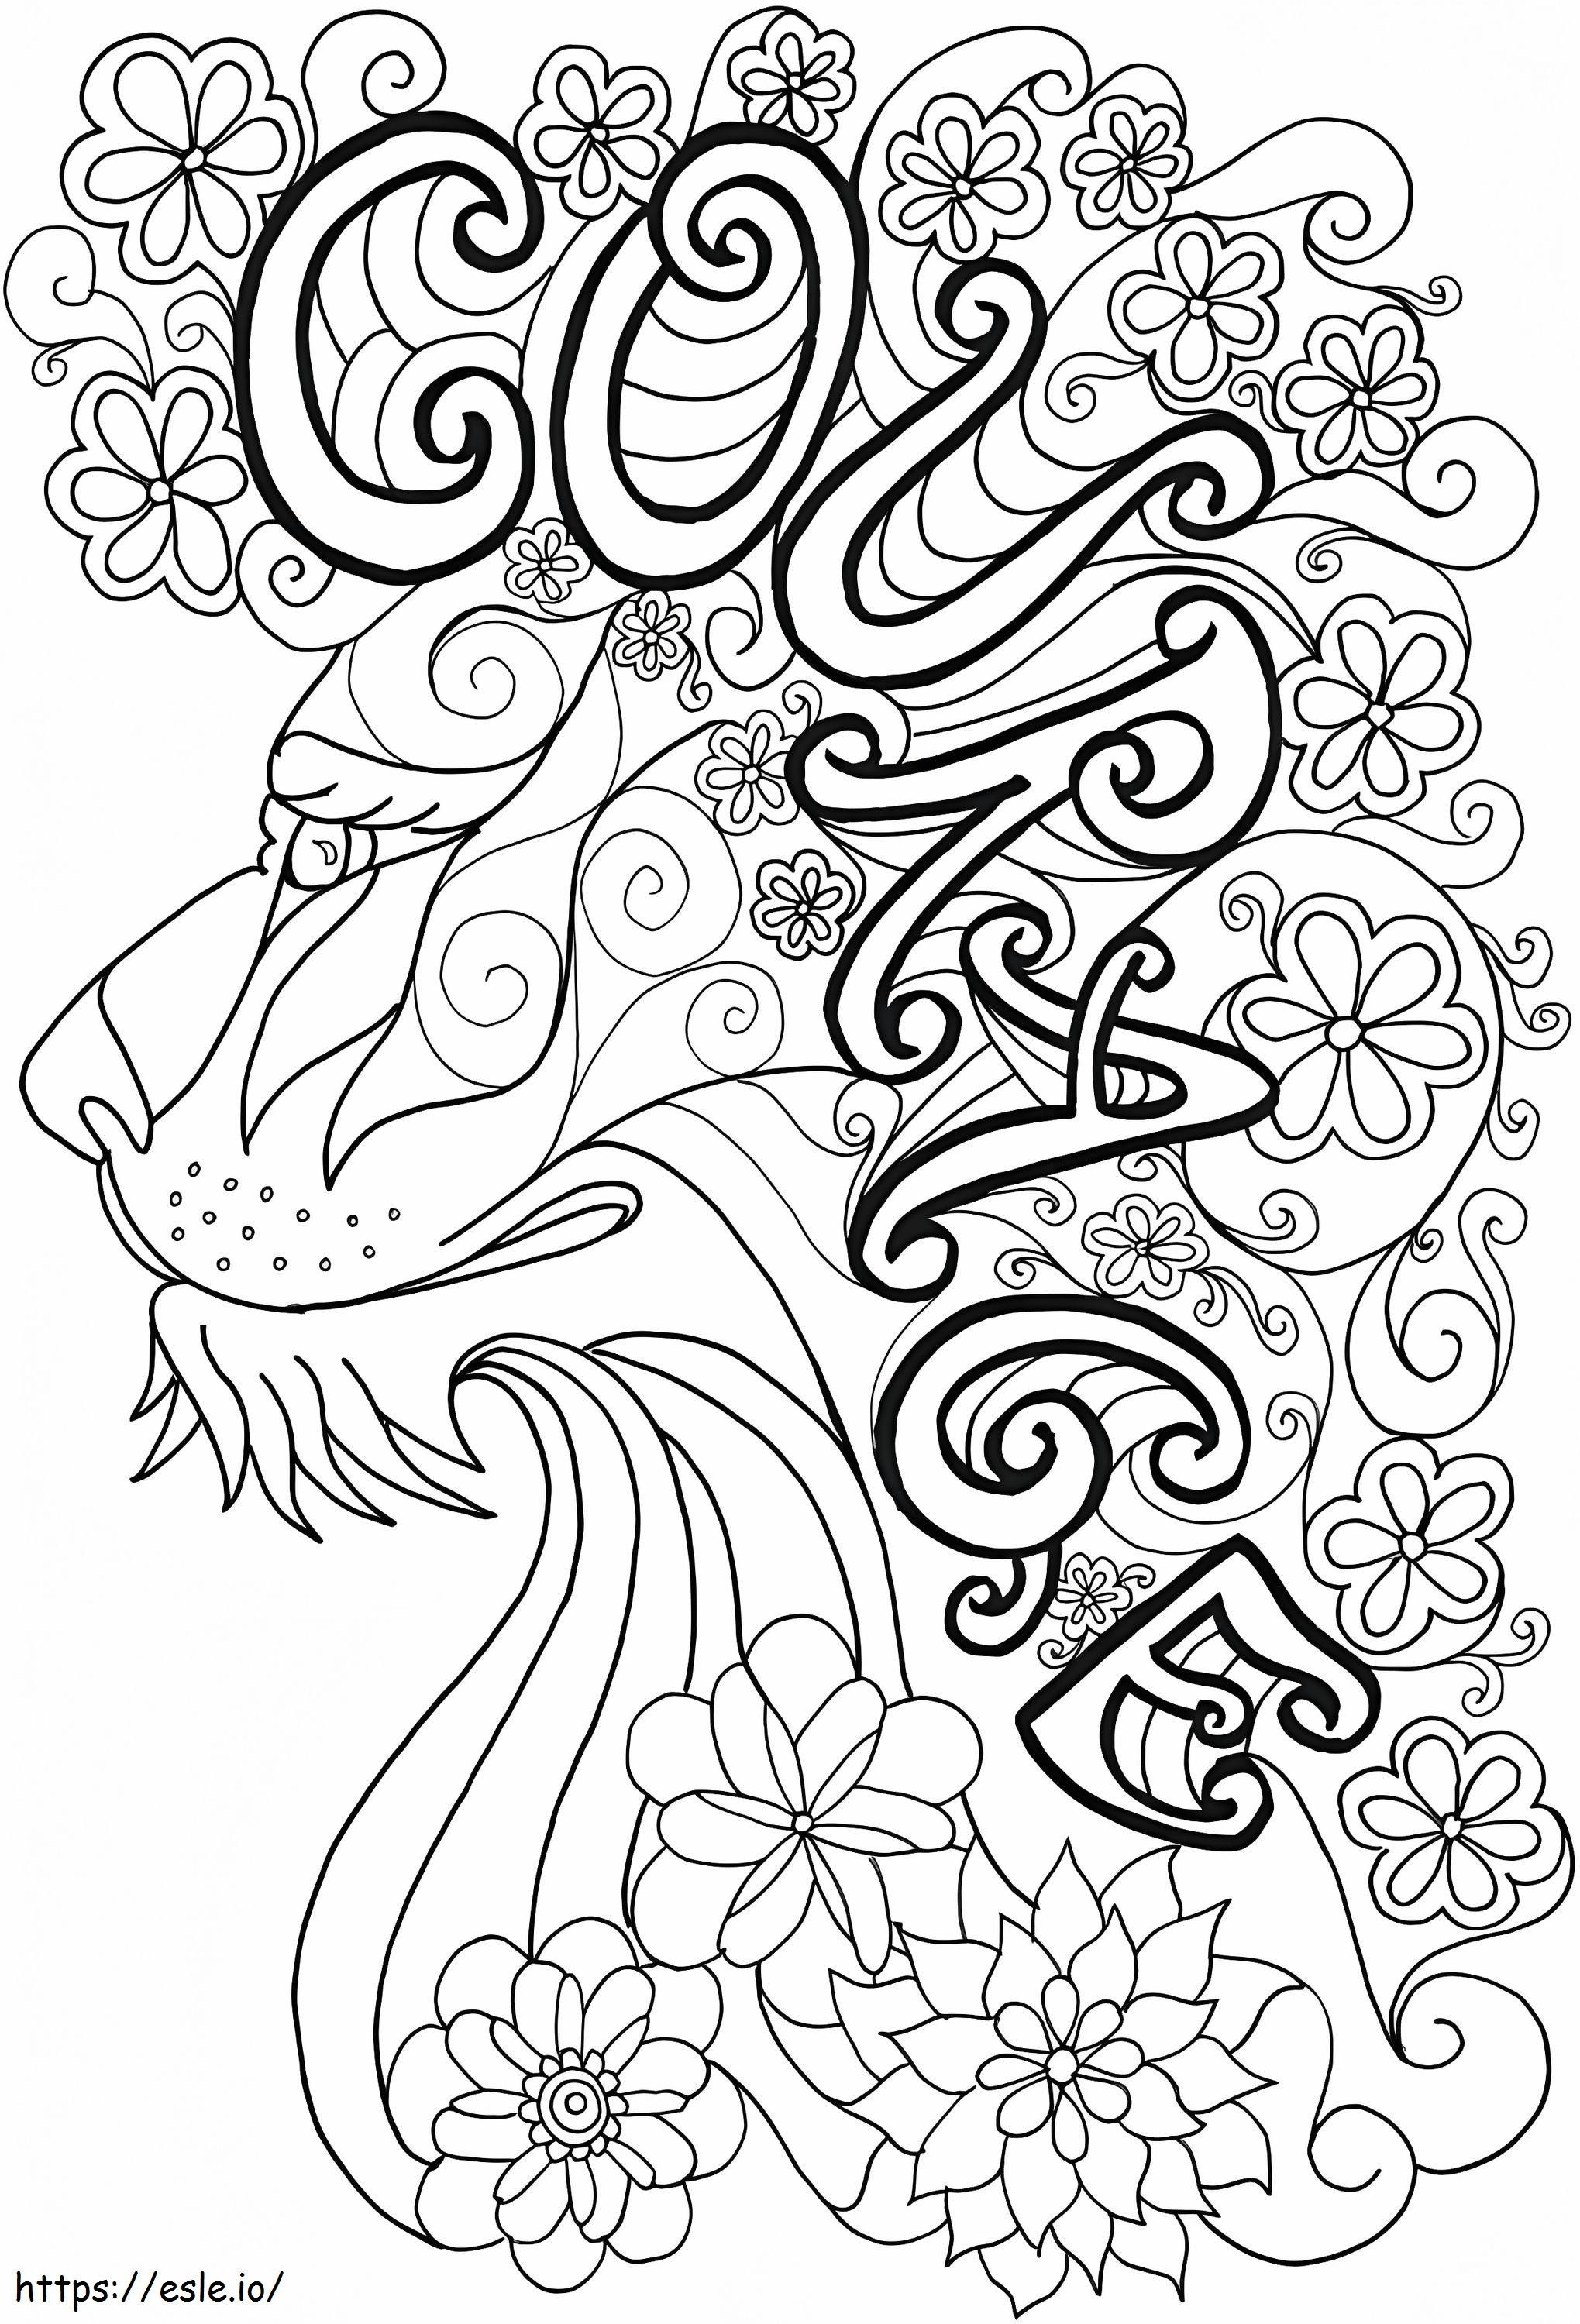 Courage Art coloring page